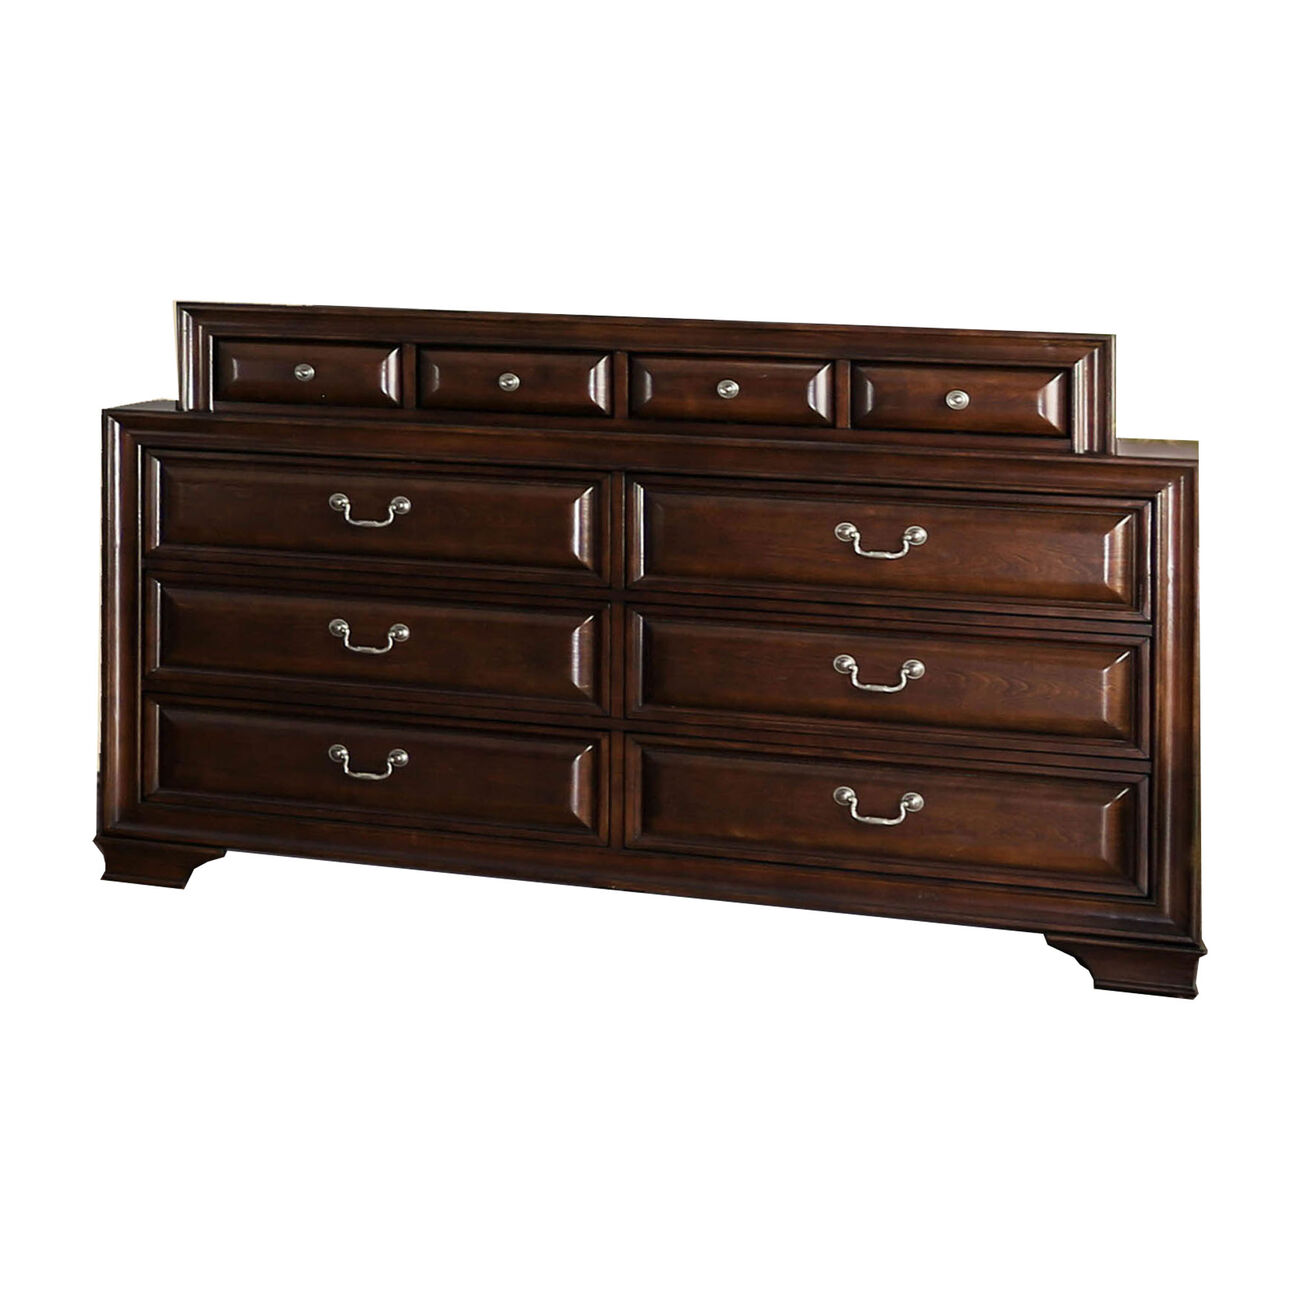 Transitional Wooden Dresser with 10 Drawers and bracket Legs, Brown